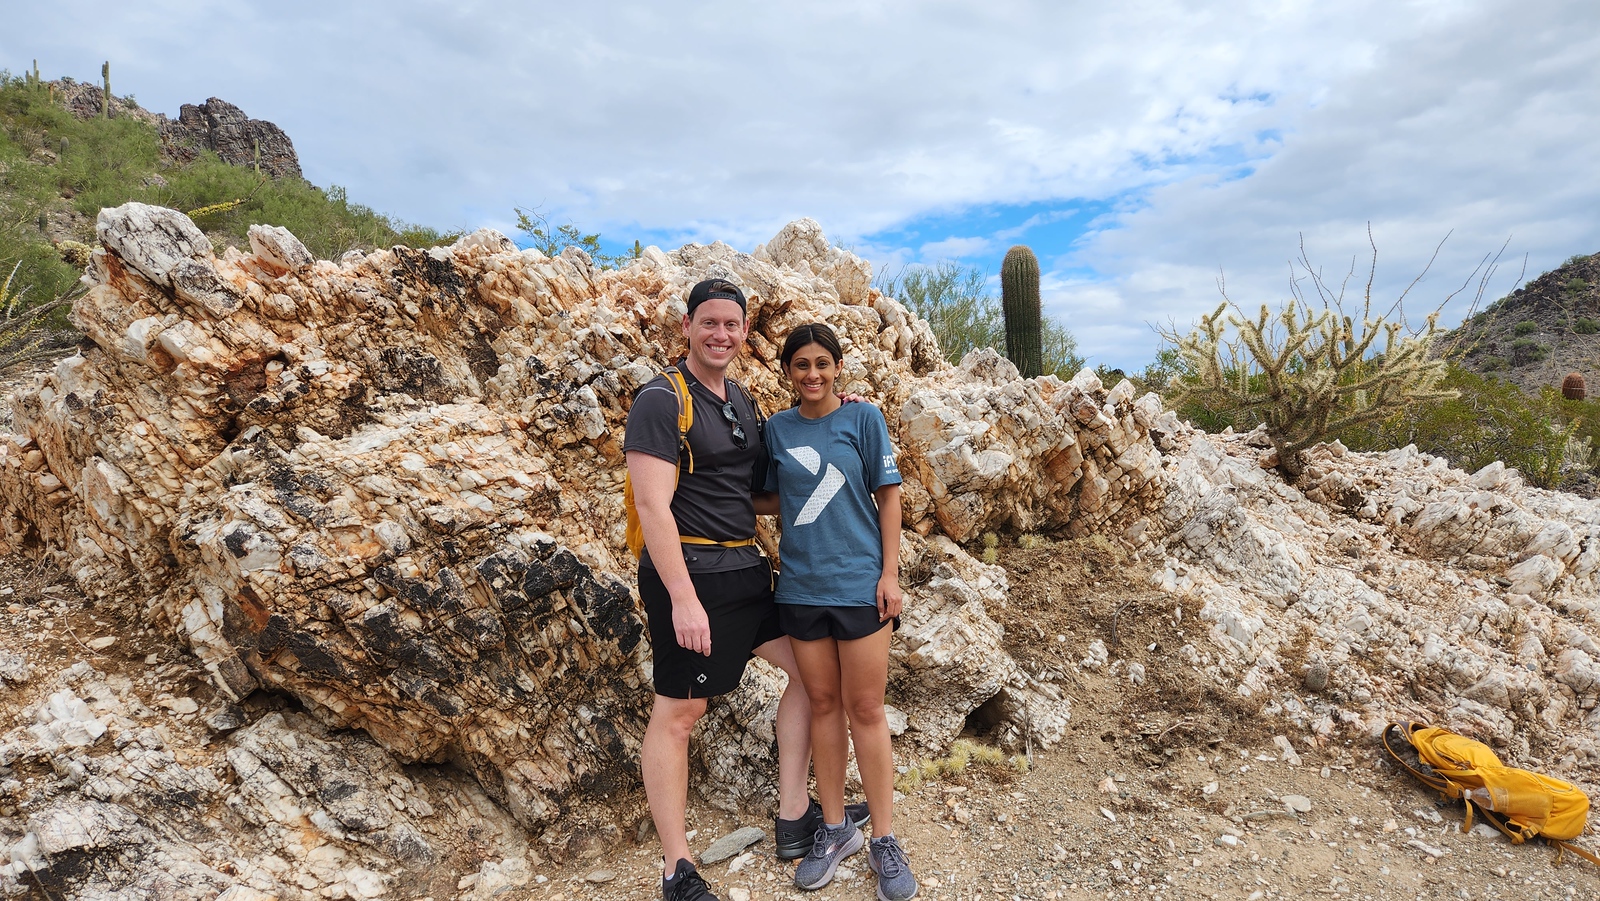 A couple is all smiles posing in front of a Sonoran Desert rock formation with a wide variety of cactus also in the picture.